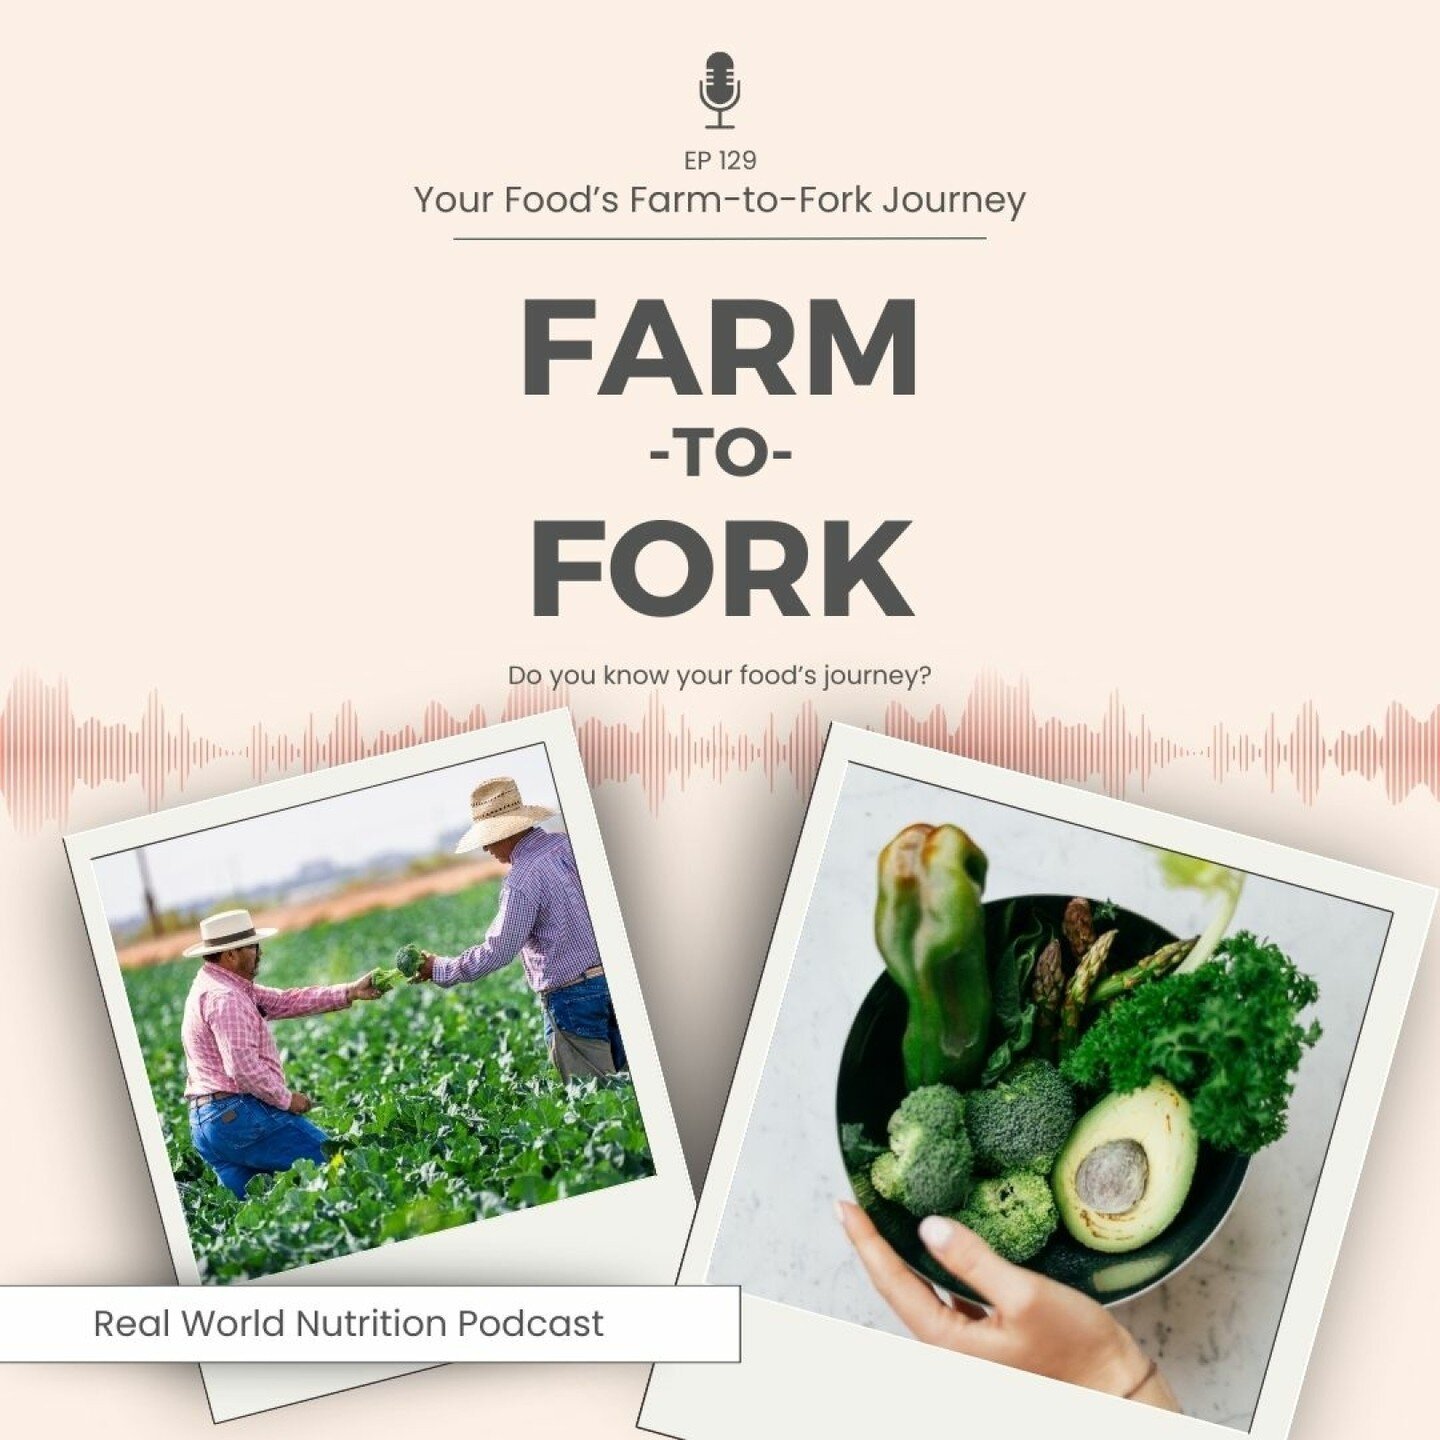 🎙️ Do you know your food&rsquo;s journey? 

🎙️Episode 129 of #RealWorldNutritionPodcast is your Food&rsquo;s Journey - Farm to Fork.

🎙️Join me, Shelley A. Rael, as I address the path from farm to fork, acknowledging the dedicated individuals who 